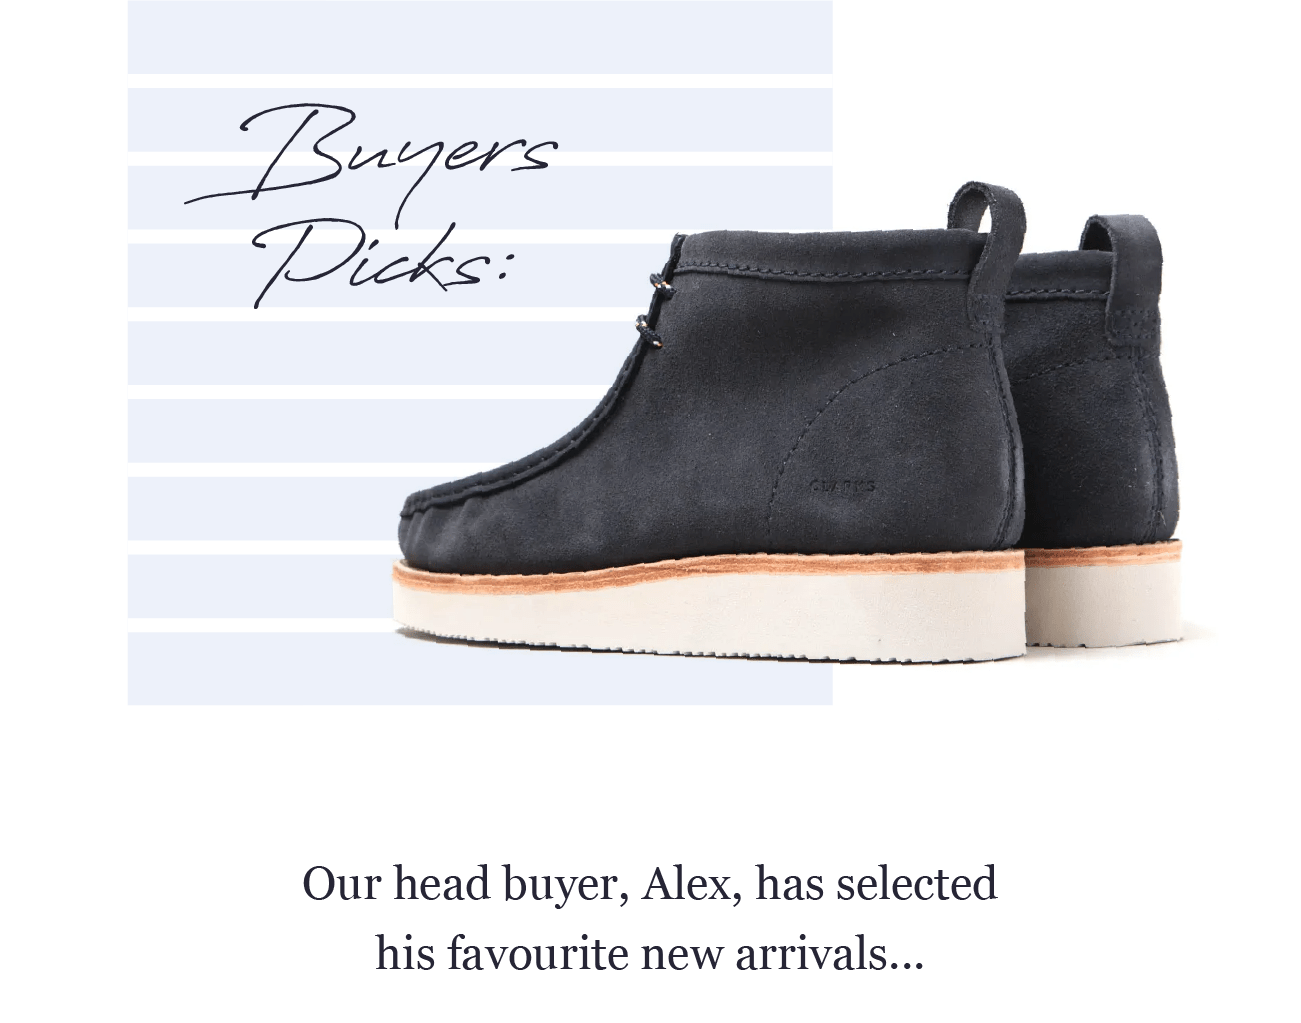 Buyers Picks: Our head buyer, Alex, has selected his favourite new arrivals...